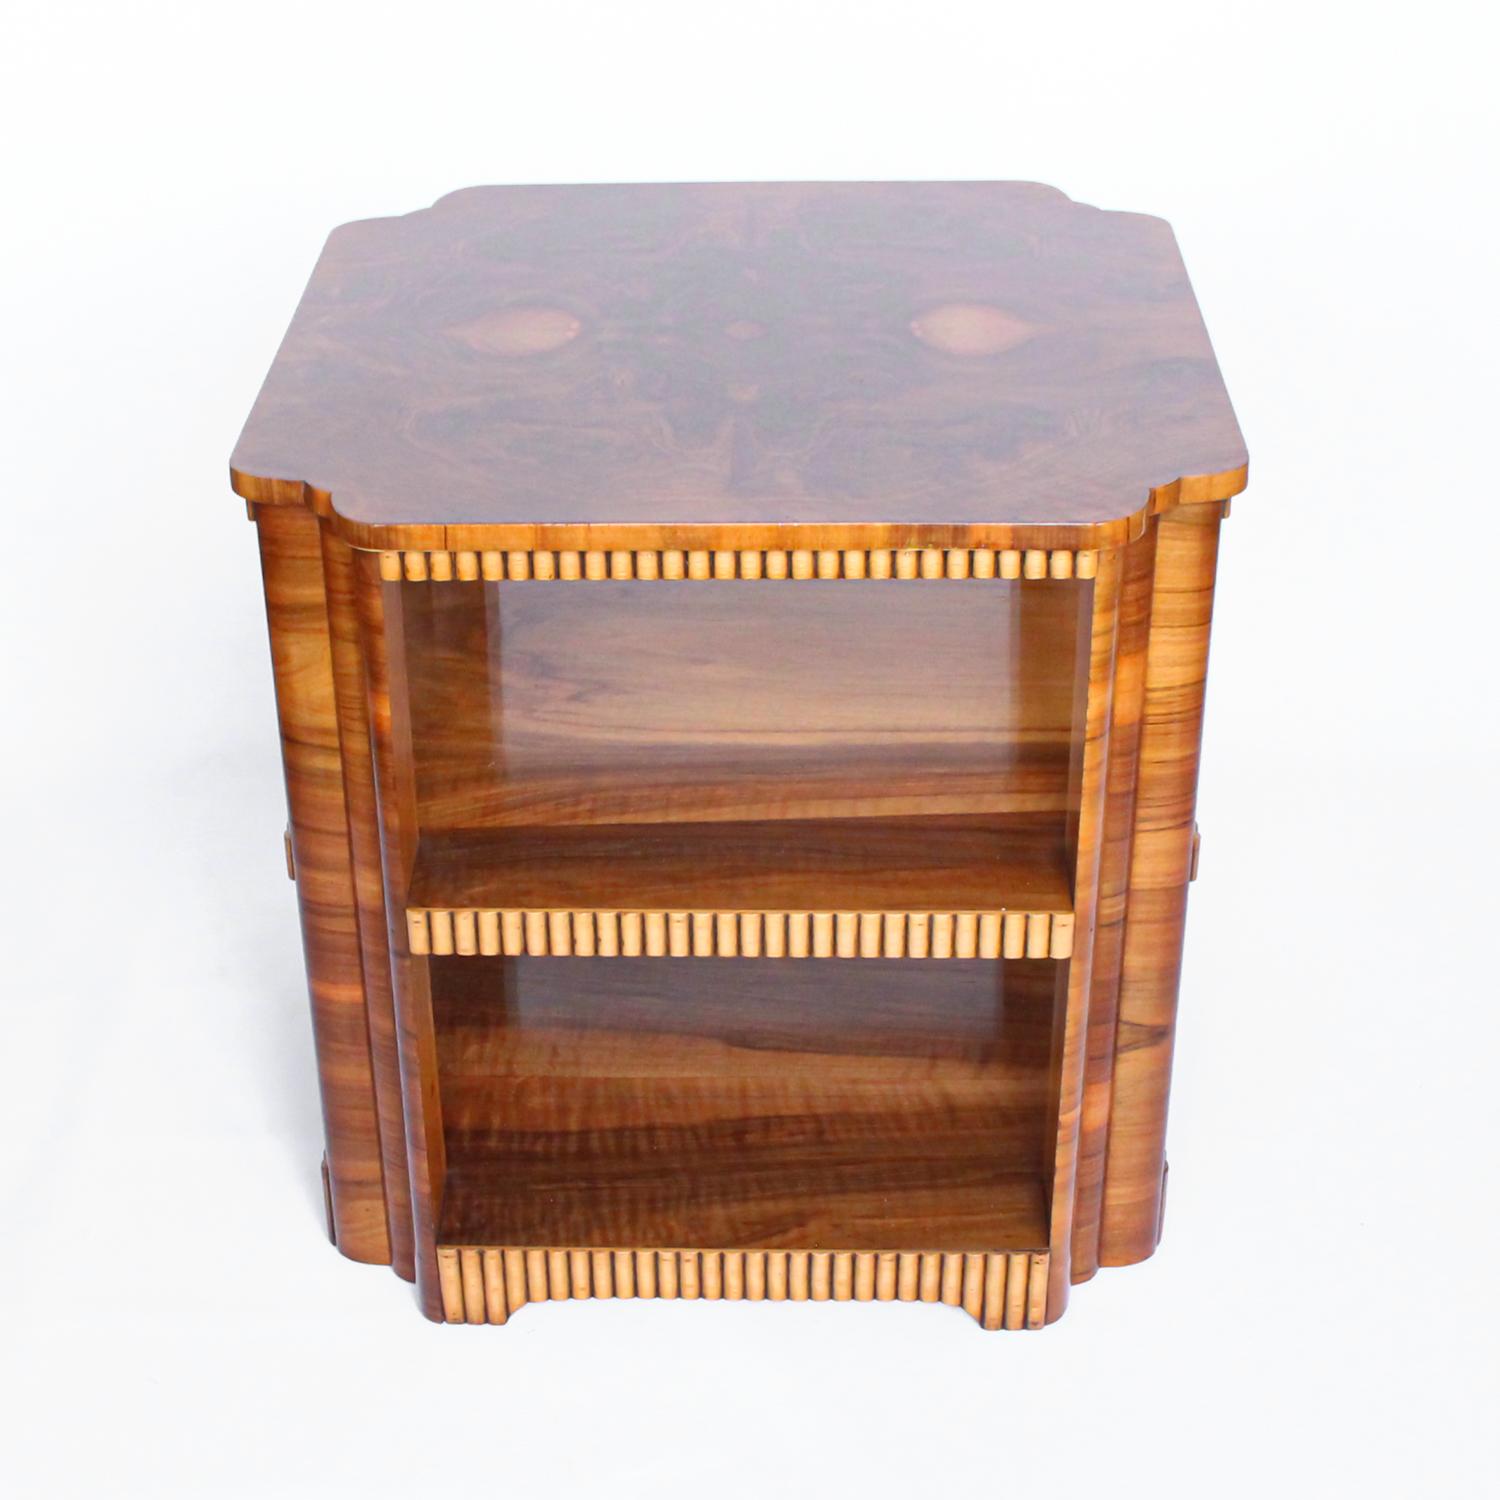 An Art Deco, walnut veneer side table with reed banded decoration throughout.

Origin: England

Date: circa 1935

